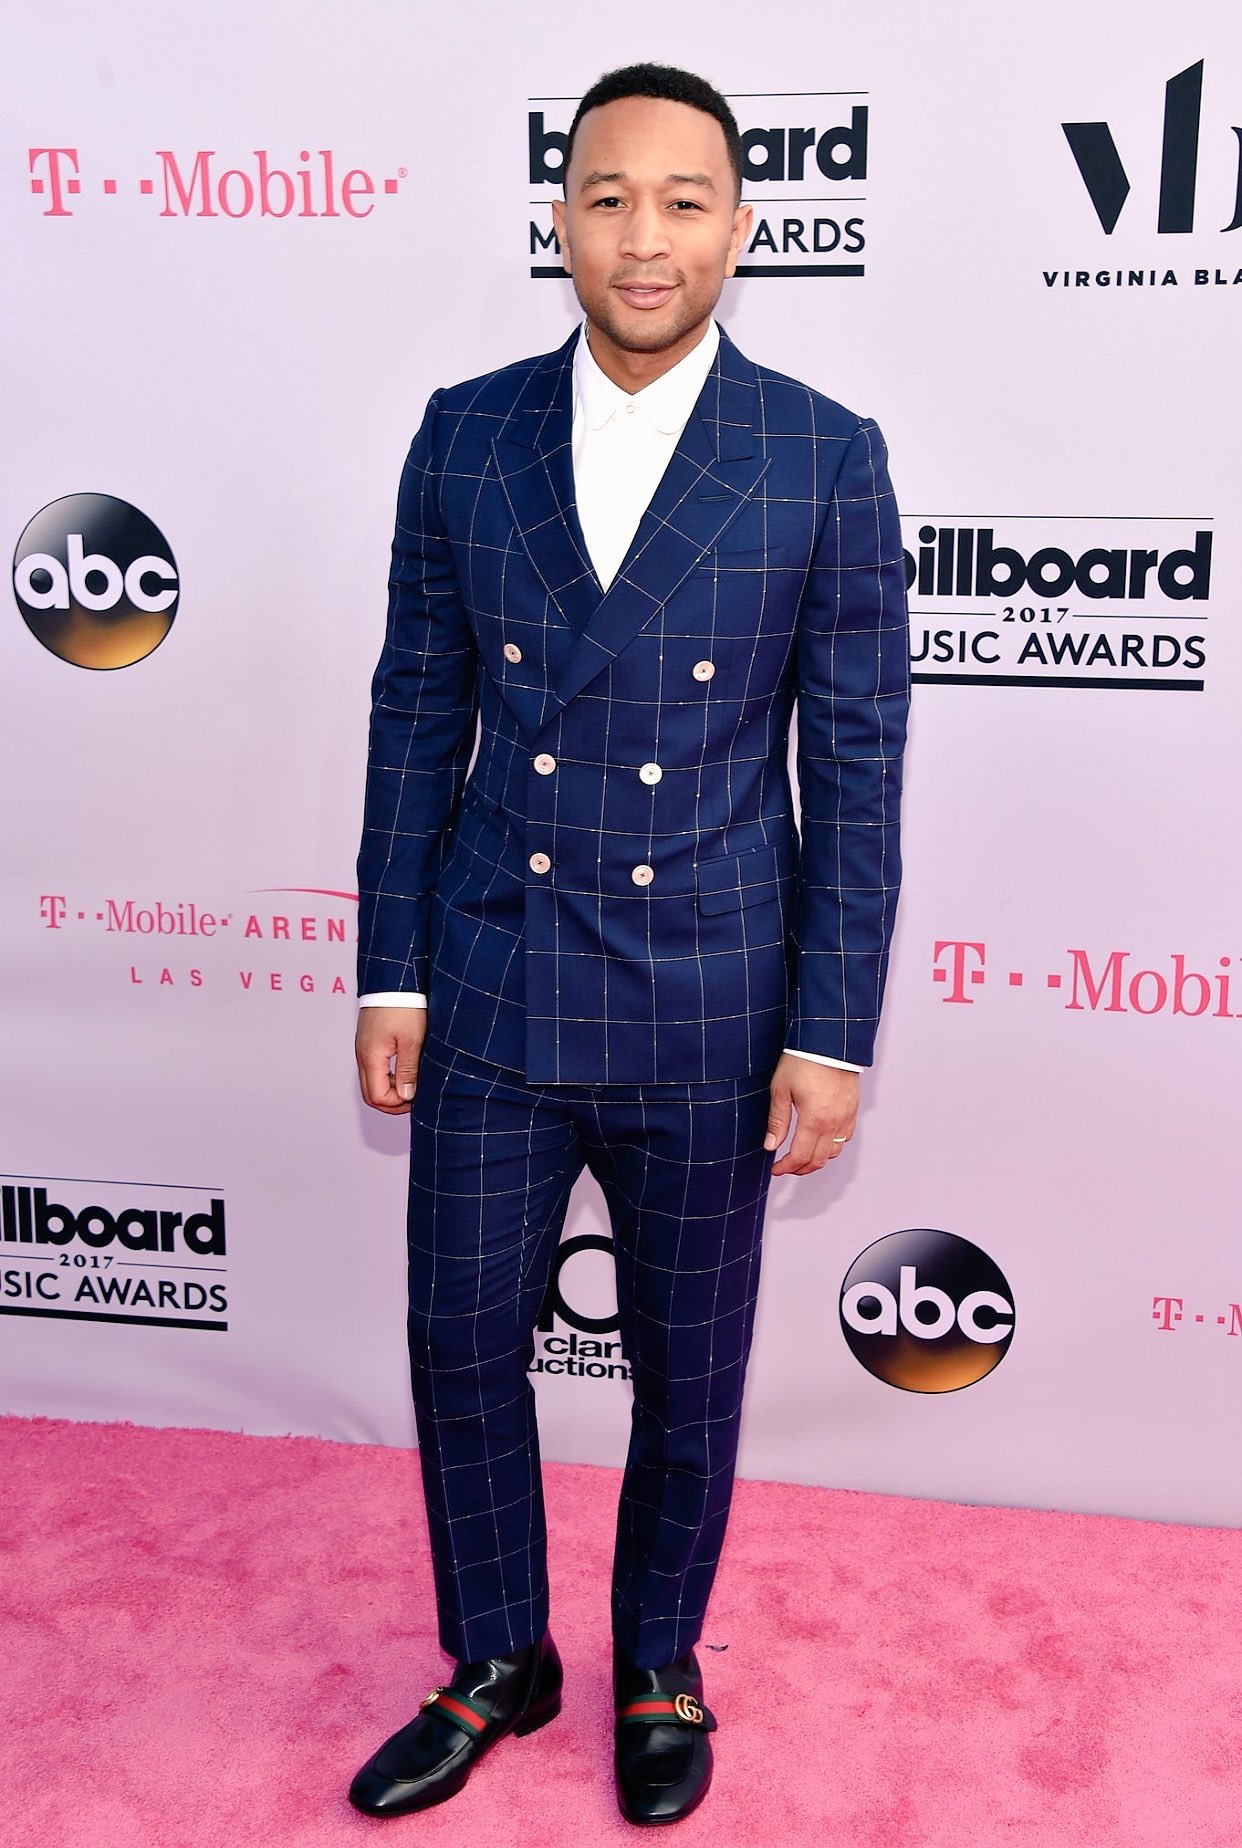 Spotted: John Legend Wears Gucci Suit & Loafers at Billboard Music Awards 2017 – PAUSE Online | Street Style, Fashion News & Streetwear